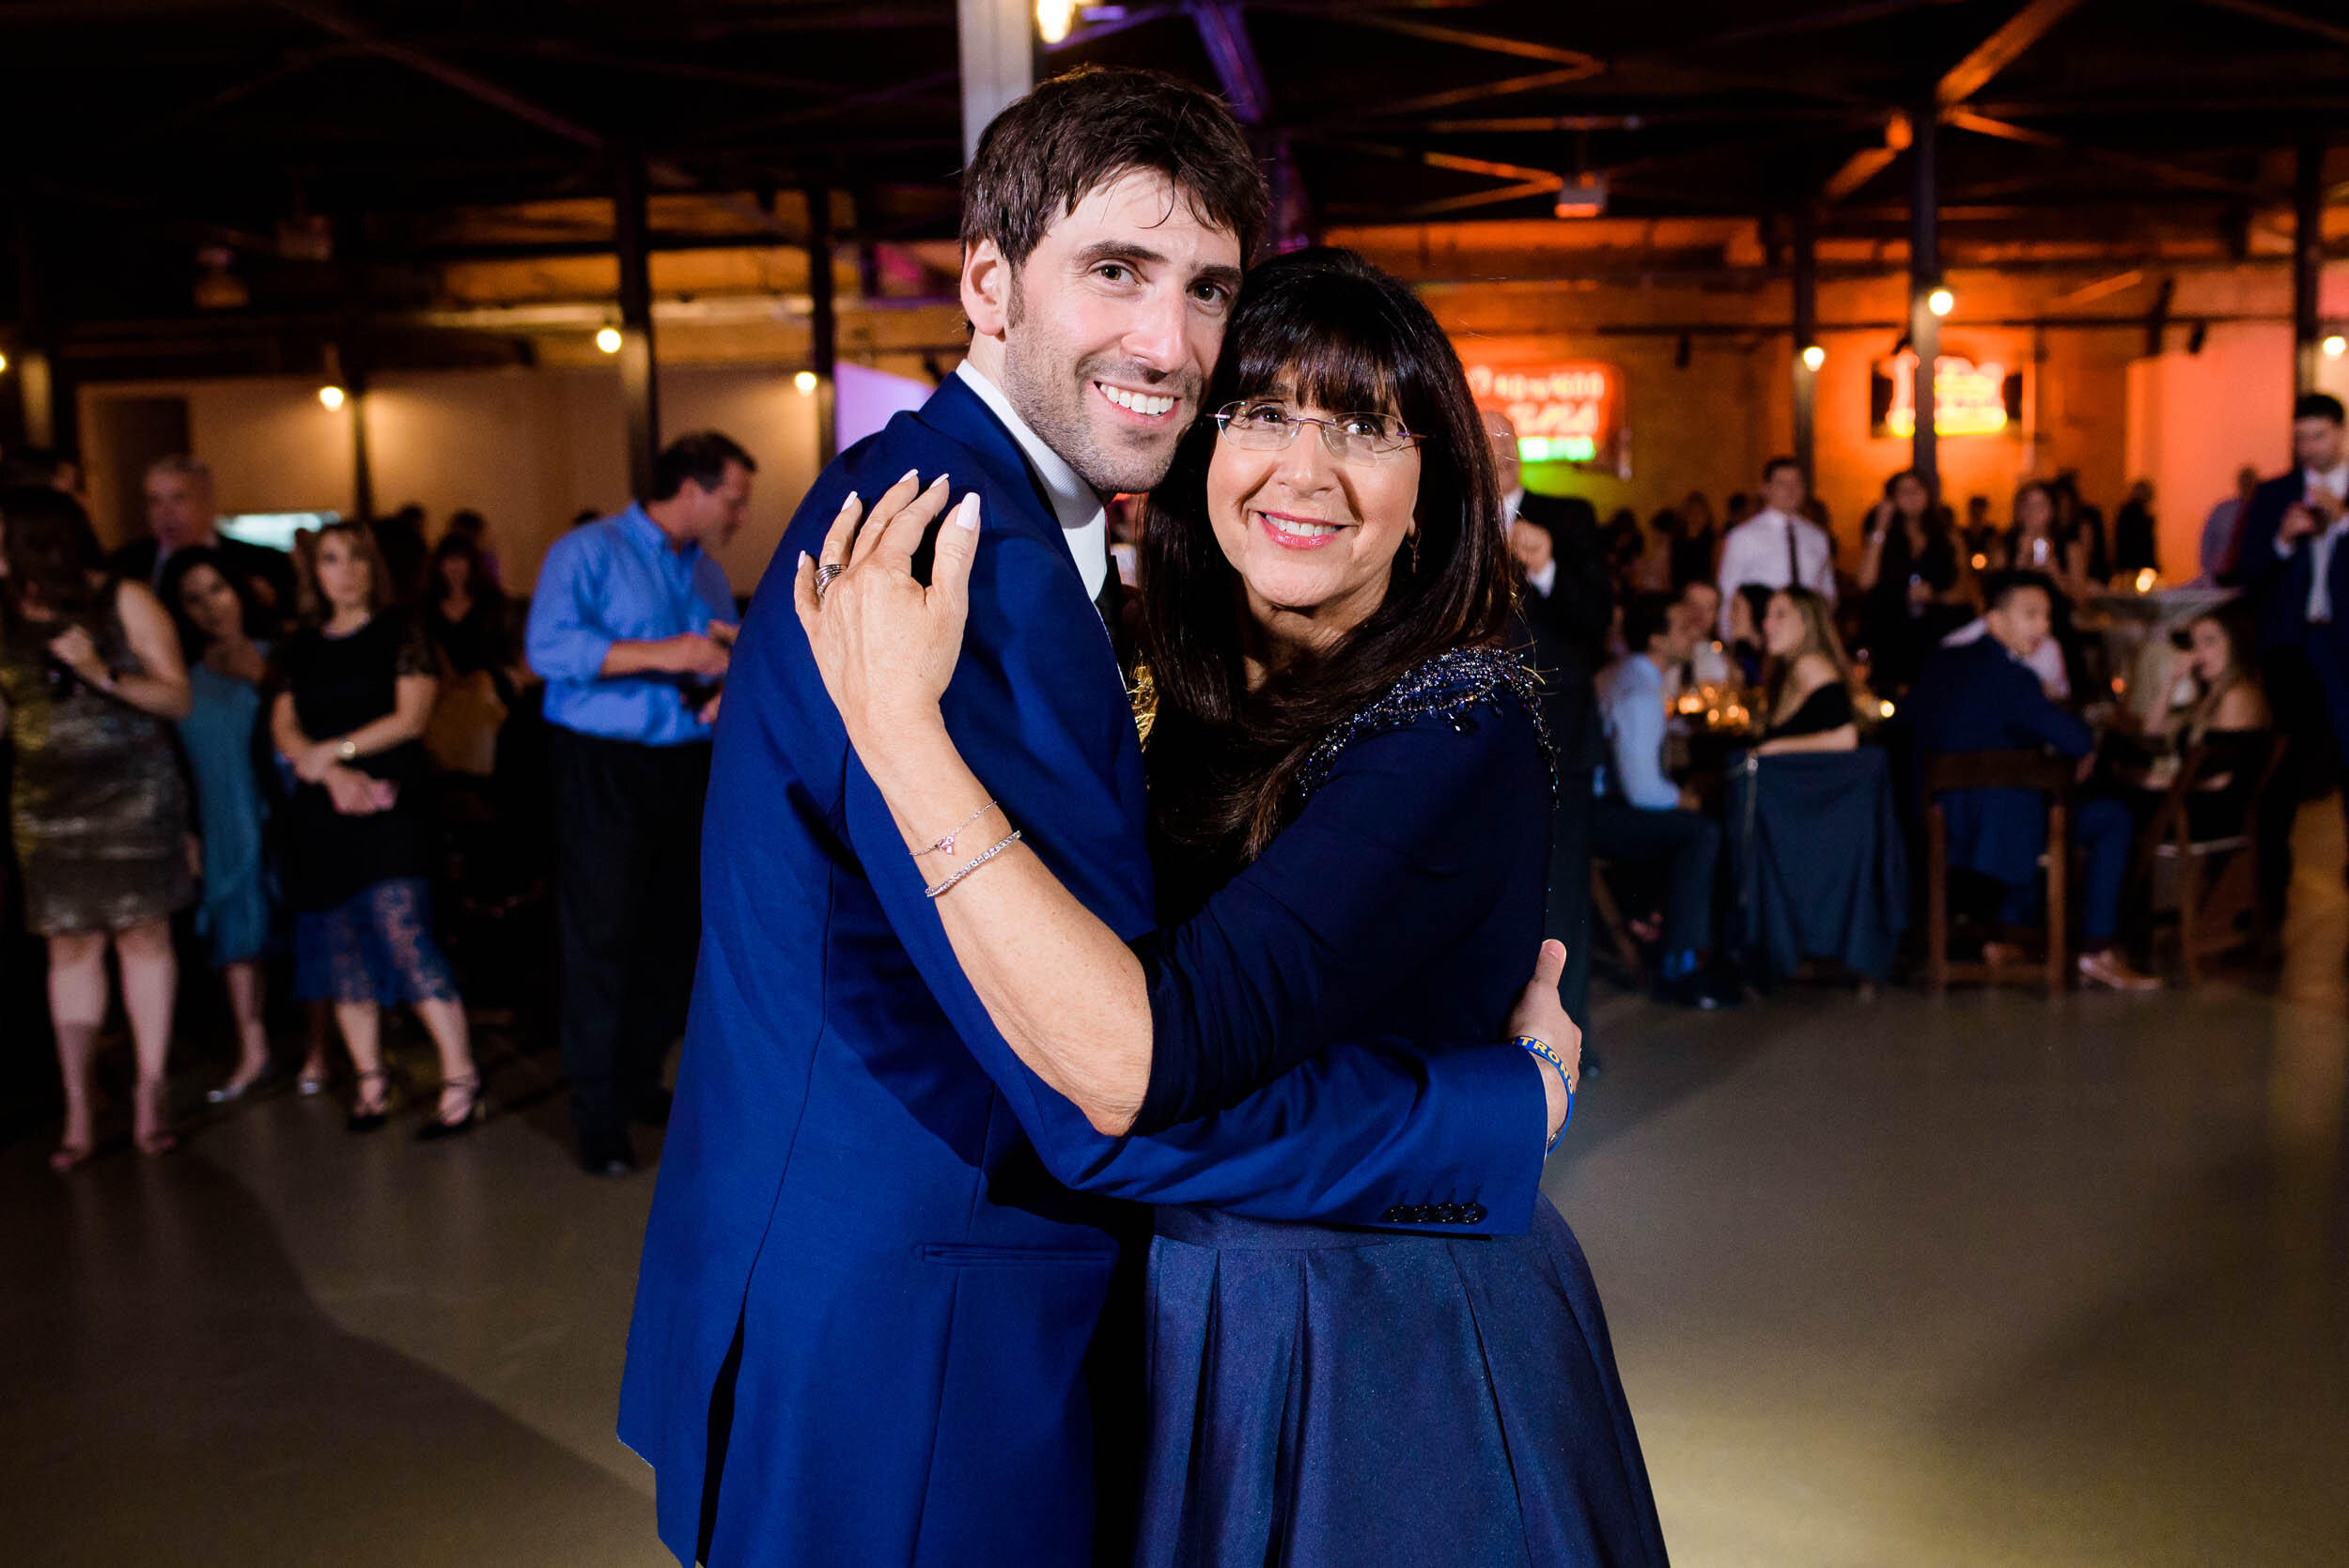 Groom and mom dance at the reception: Ravenswood Event Center Chicago wedding captured by J. Brown Photography.  